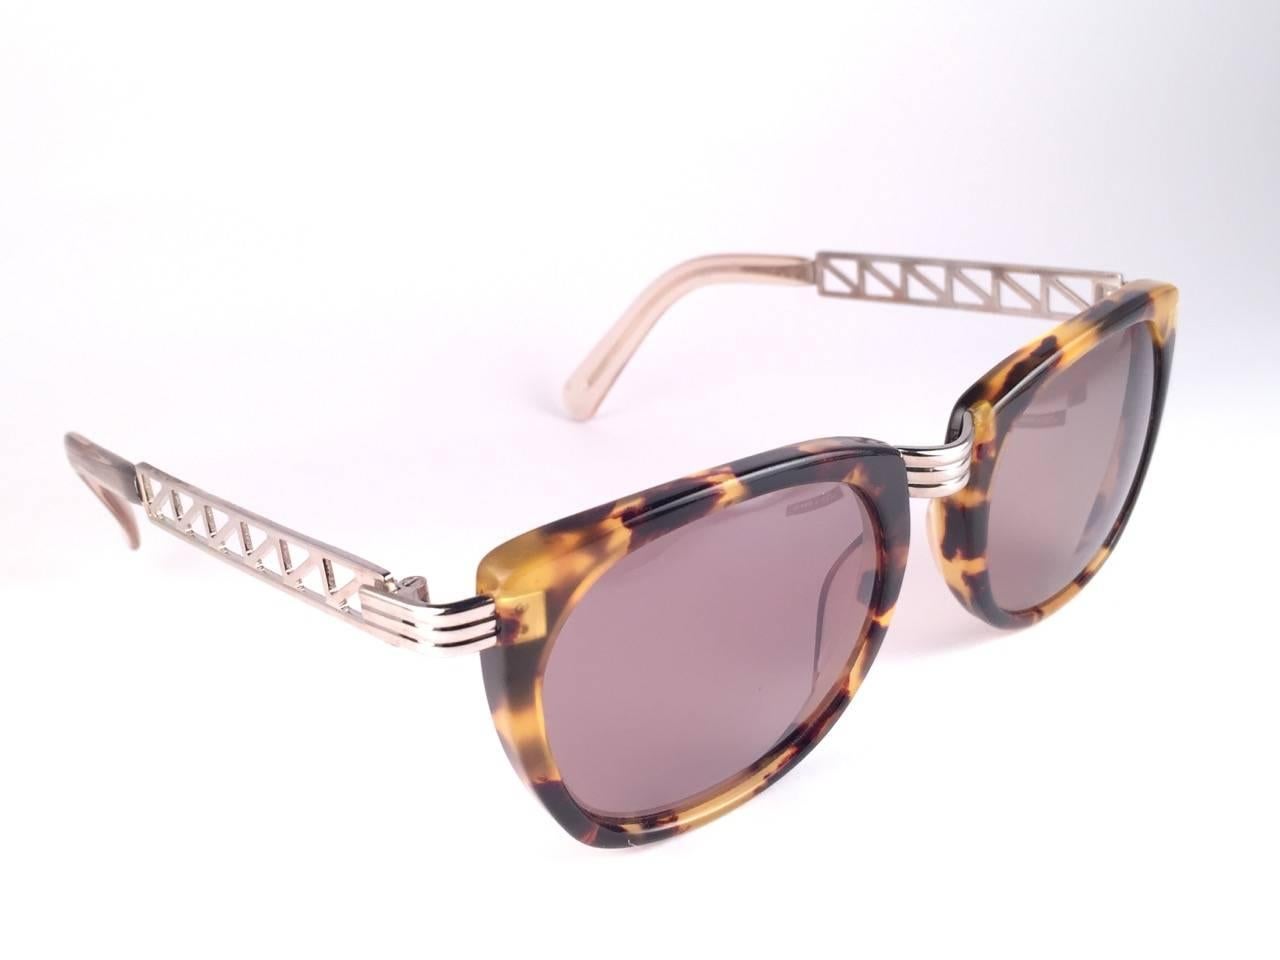 Superb Collectors Item!!
New Jean Paul Gaultier 56 0272 Eiffel Tower Series Silver Ornaments on the temples over sleek tortoise frame. 
Spotless Dark green/ Brown lenses that complete a ready to wear JPG look.

Amazing design with strong yet